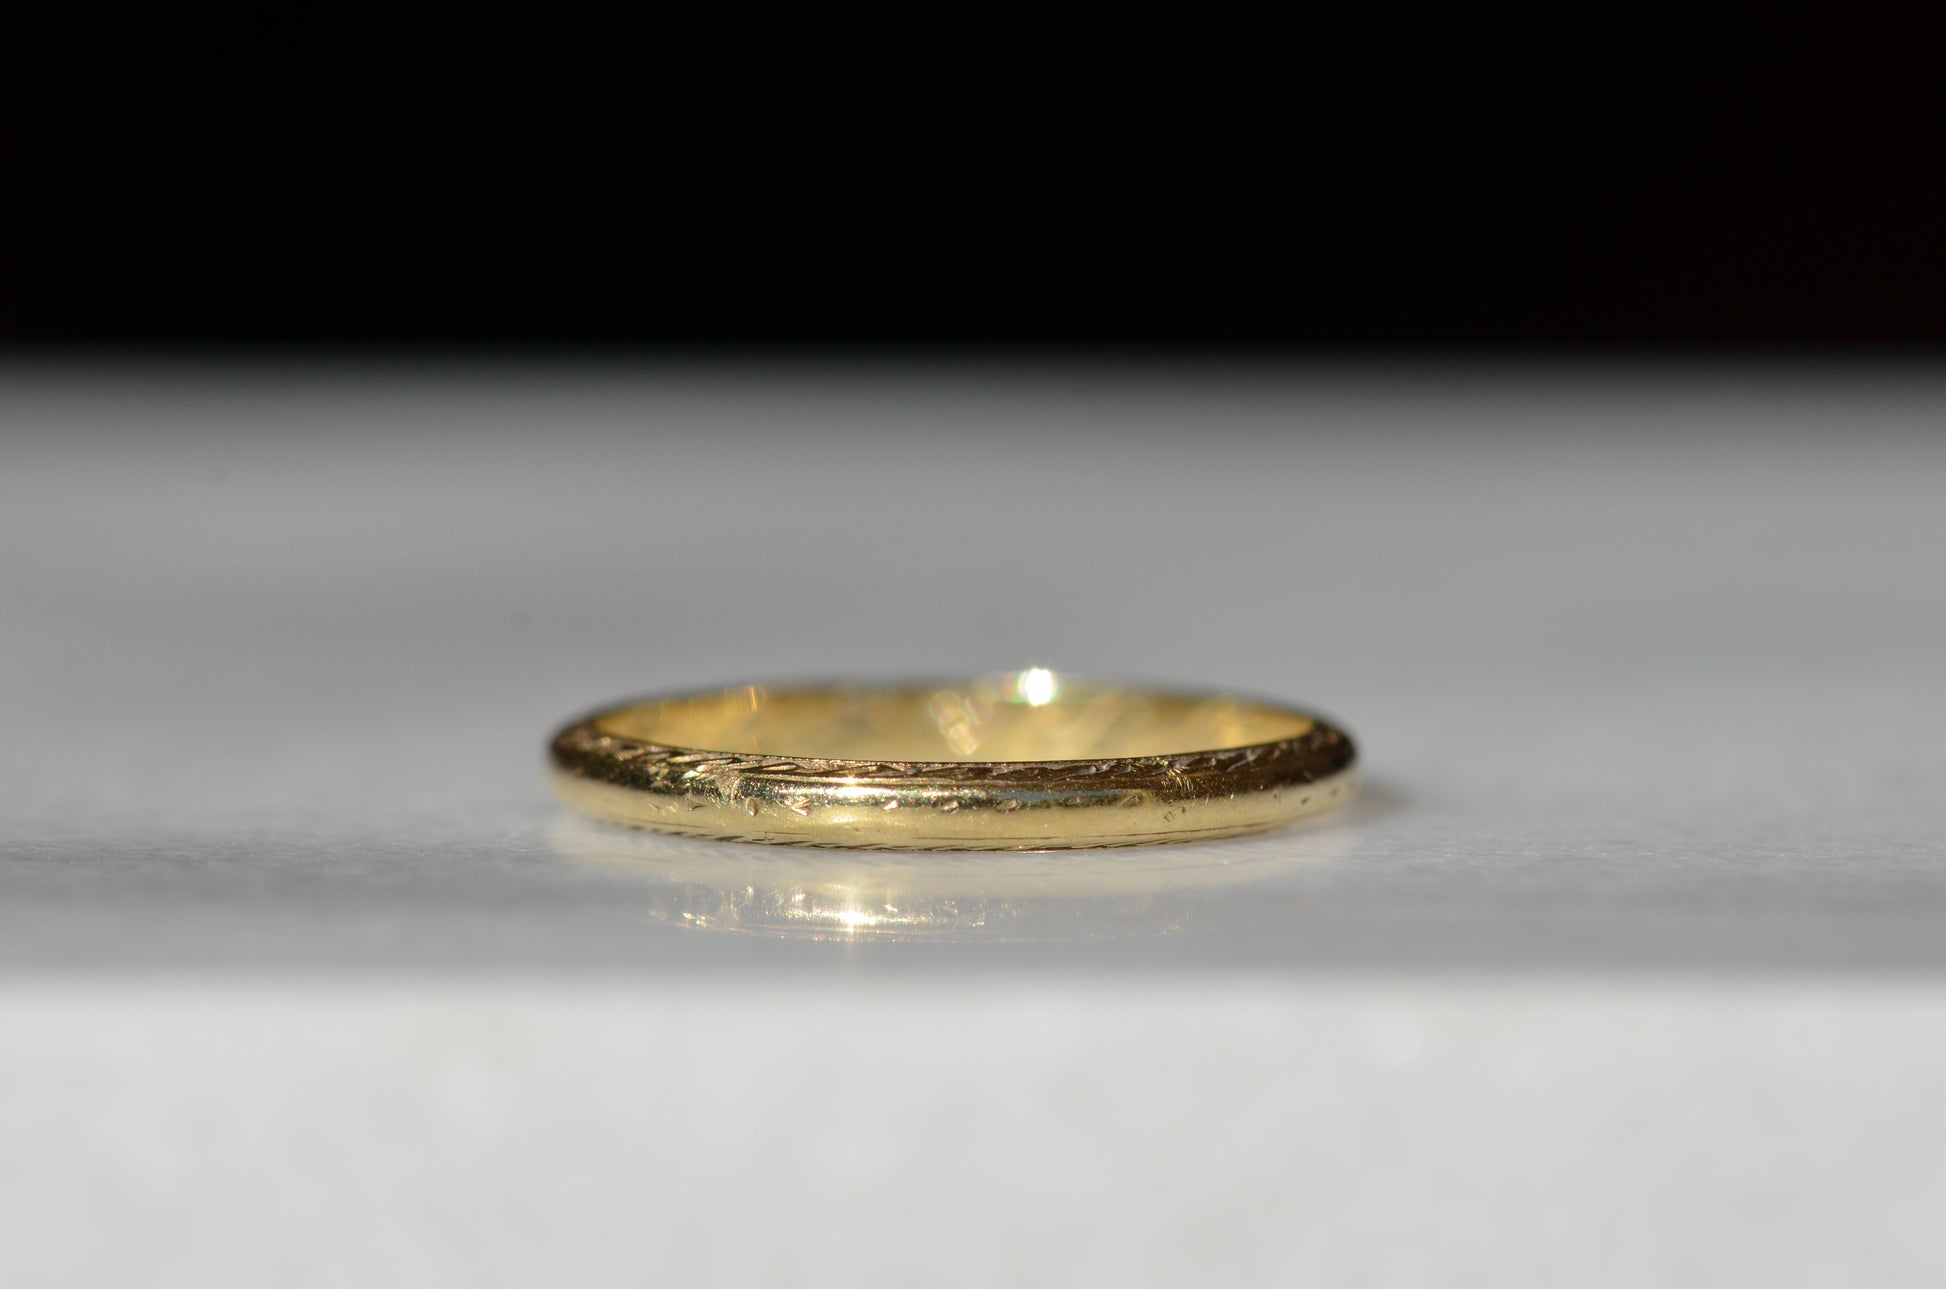 ring shown in direct sunlight on a pale grey marble background. the engraved pattern has been worn away on the outer surface of the ring, leaving only the faintest remnants. 